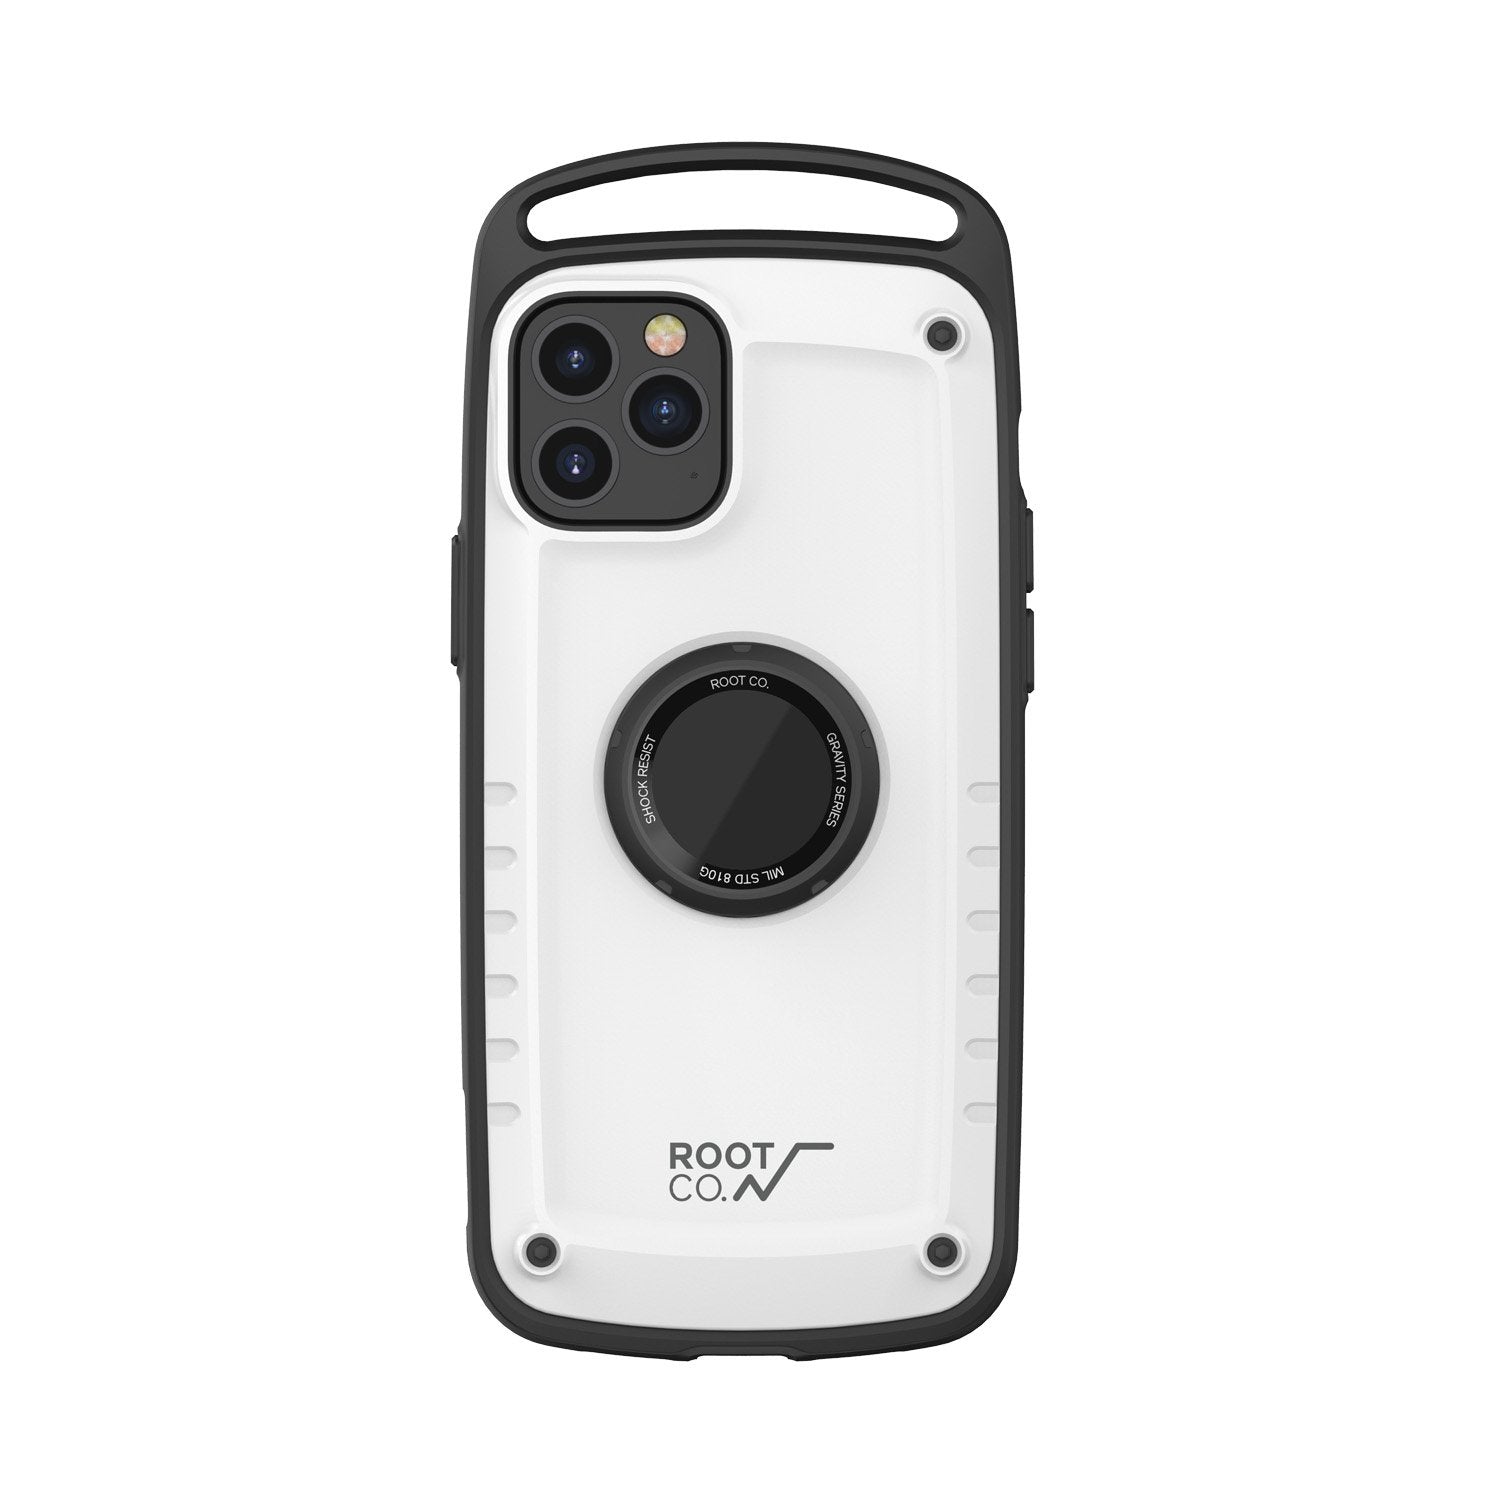 ROOT CO. Gravity Shock Resist Case Pro for iPhone 12/12 Pro 6.1"(2020), Matte White Default ROOT CO. 